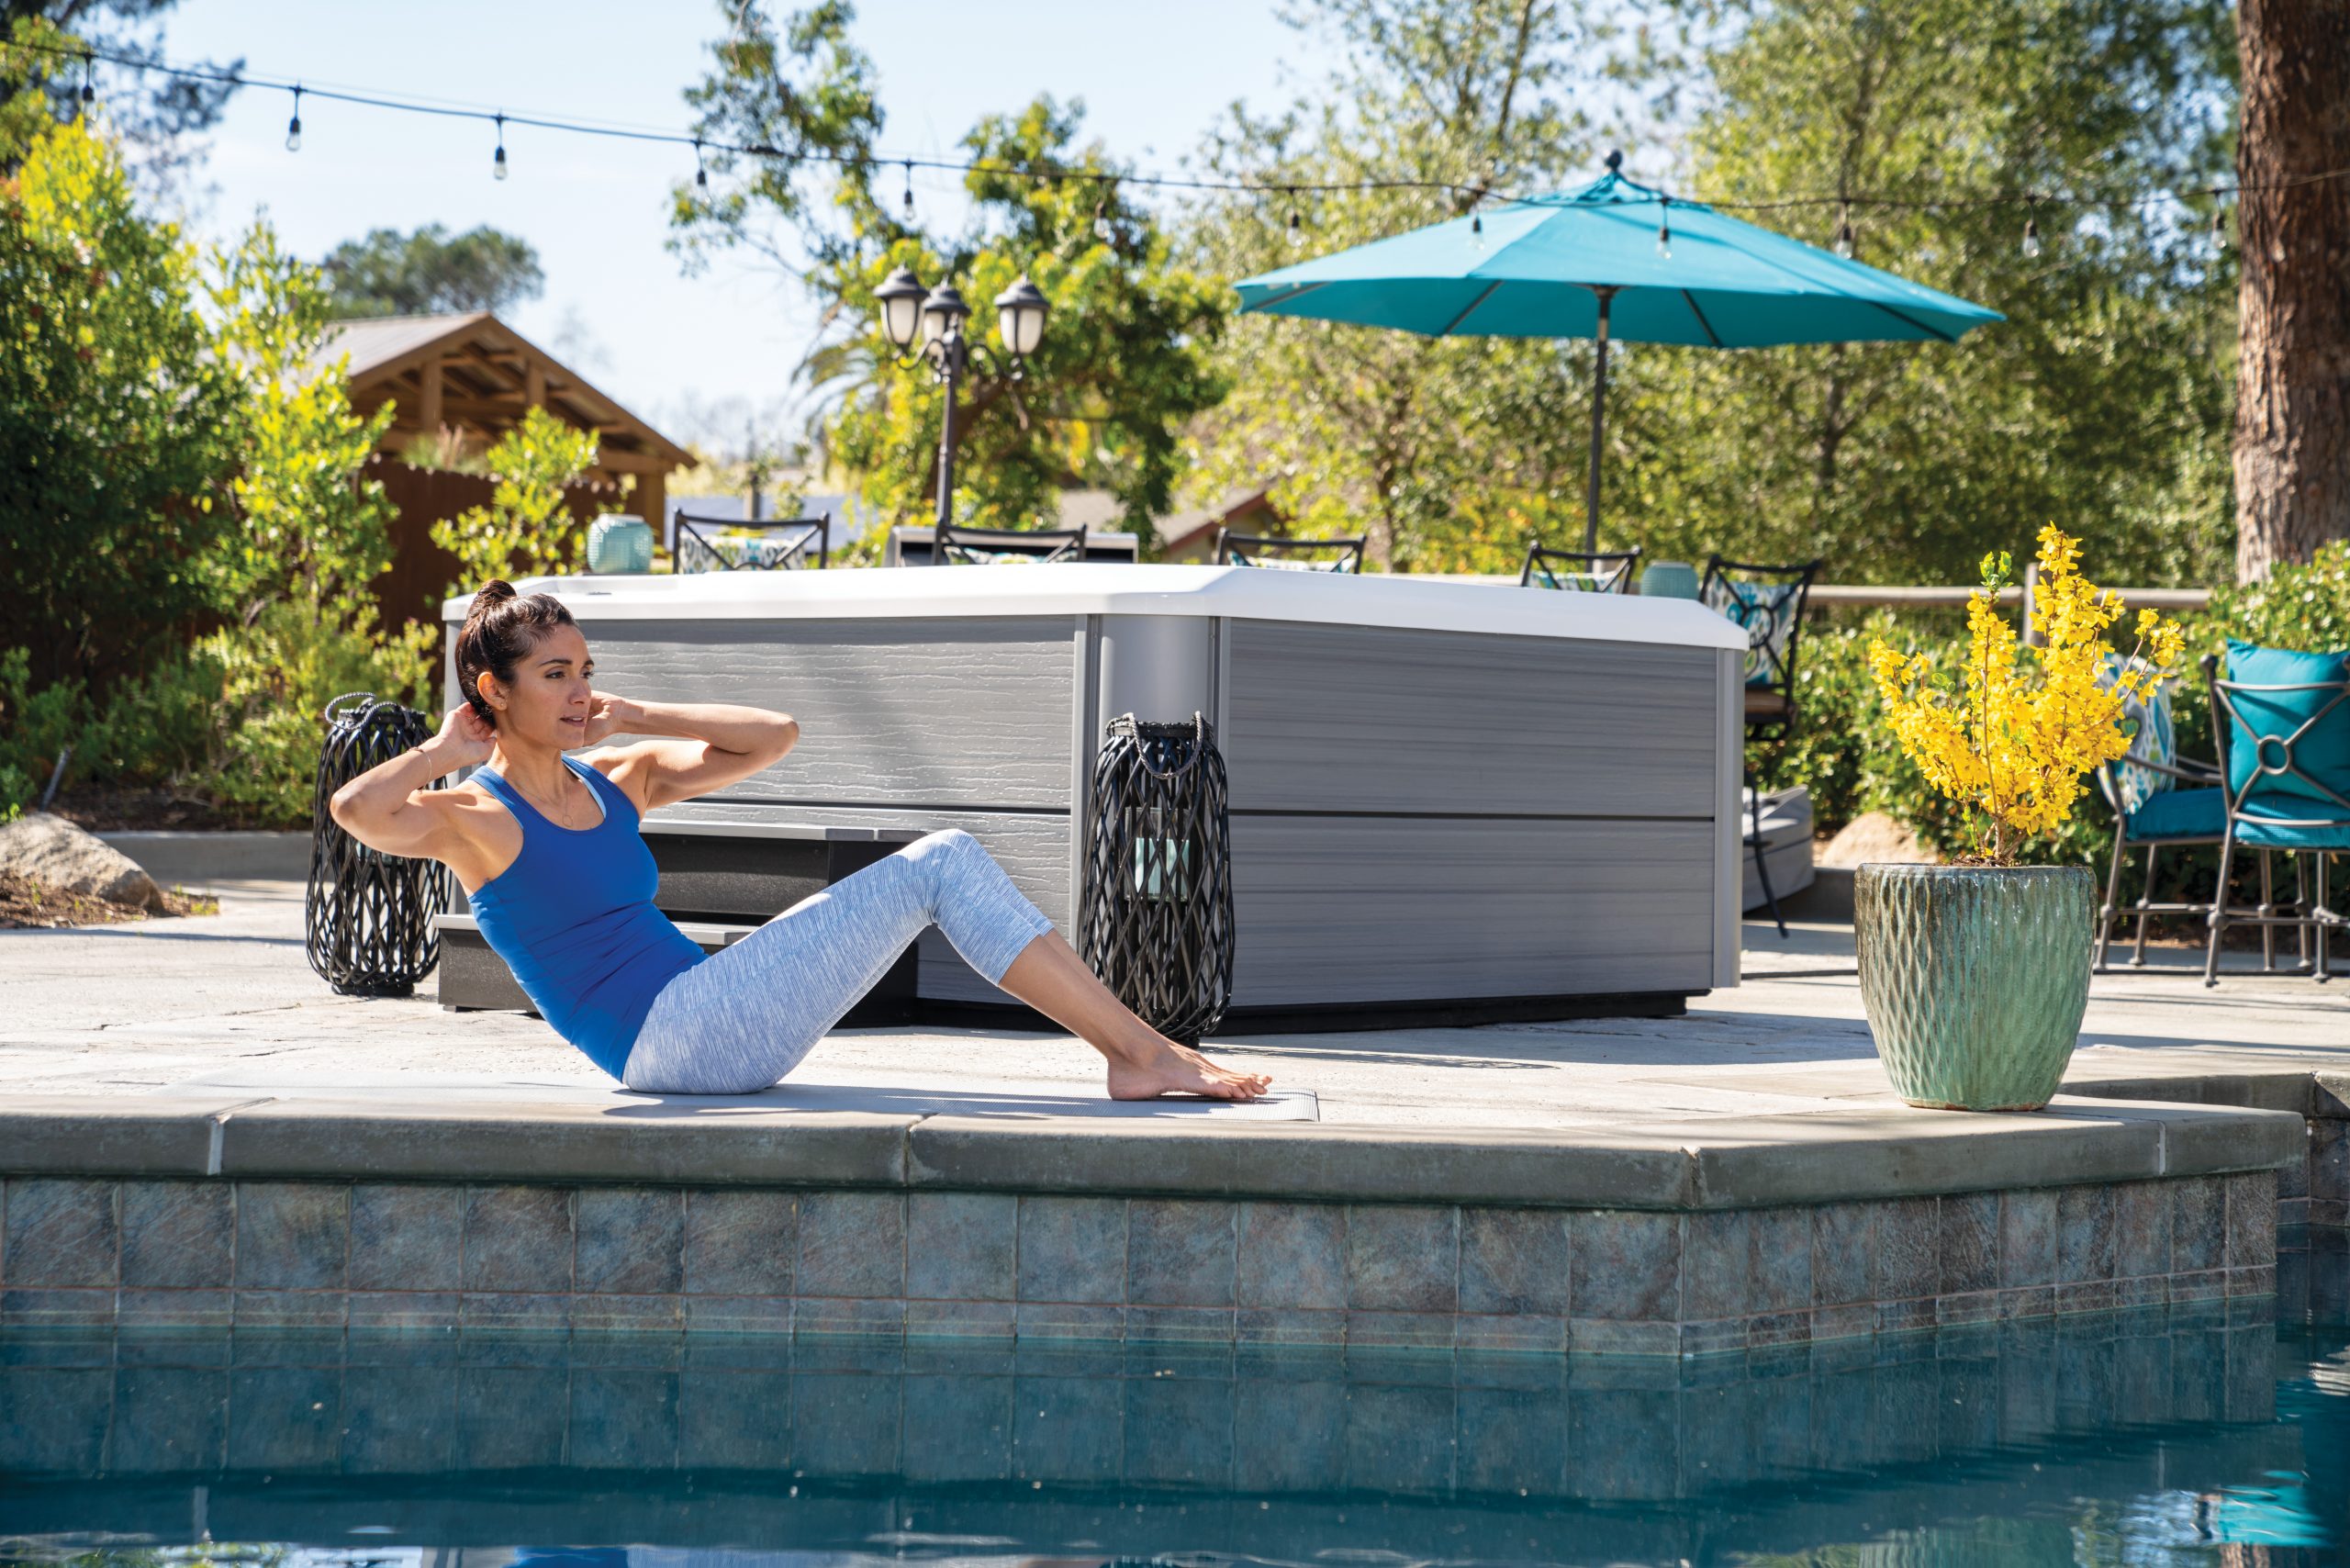 HOW A HOT TUB CAN HELP WEIGHT LOSS